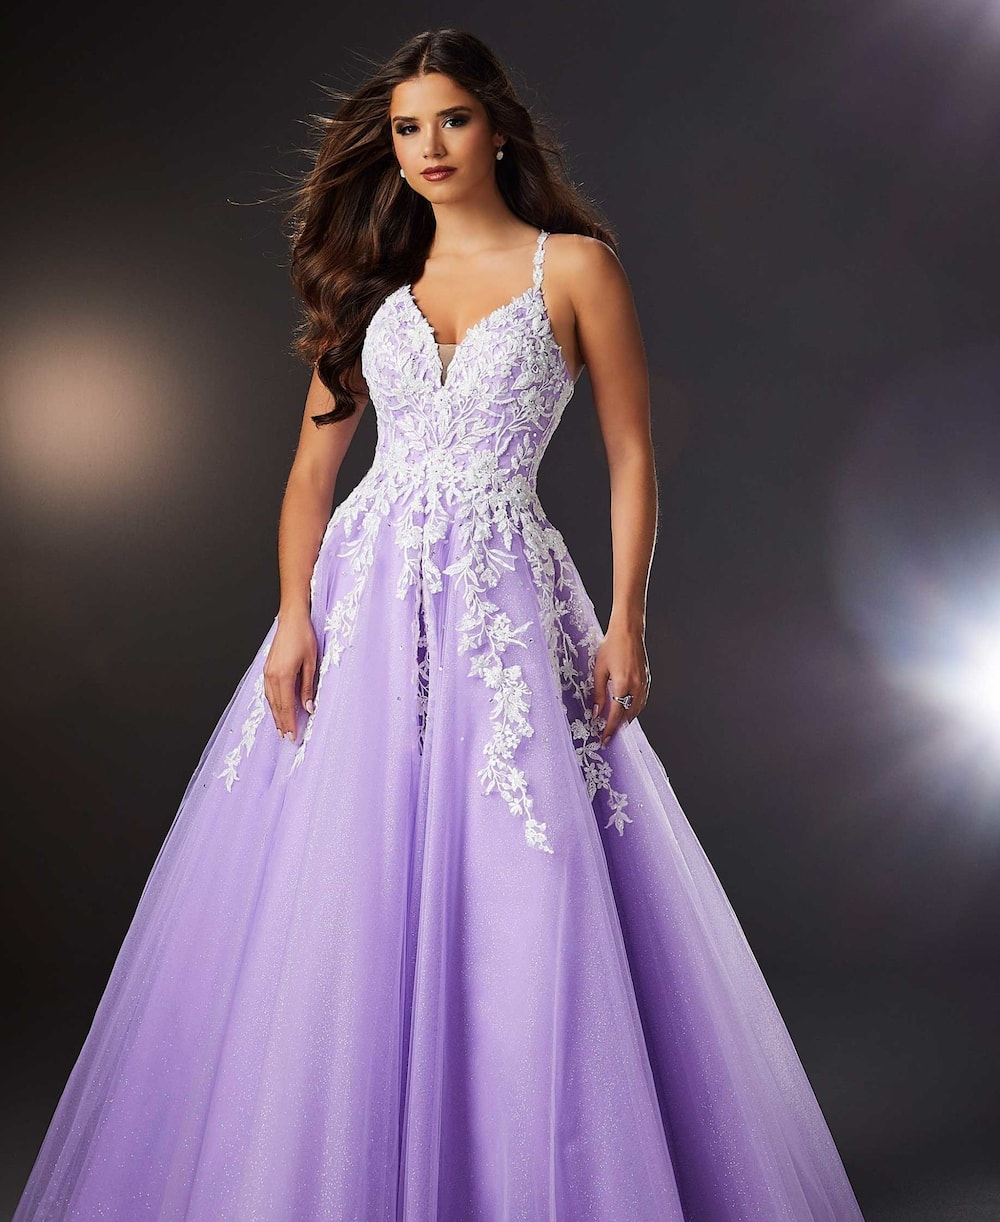 Lace ball gowns